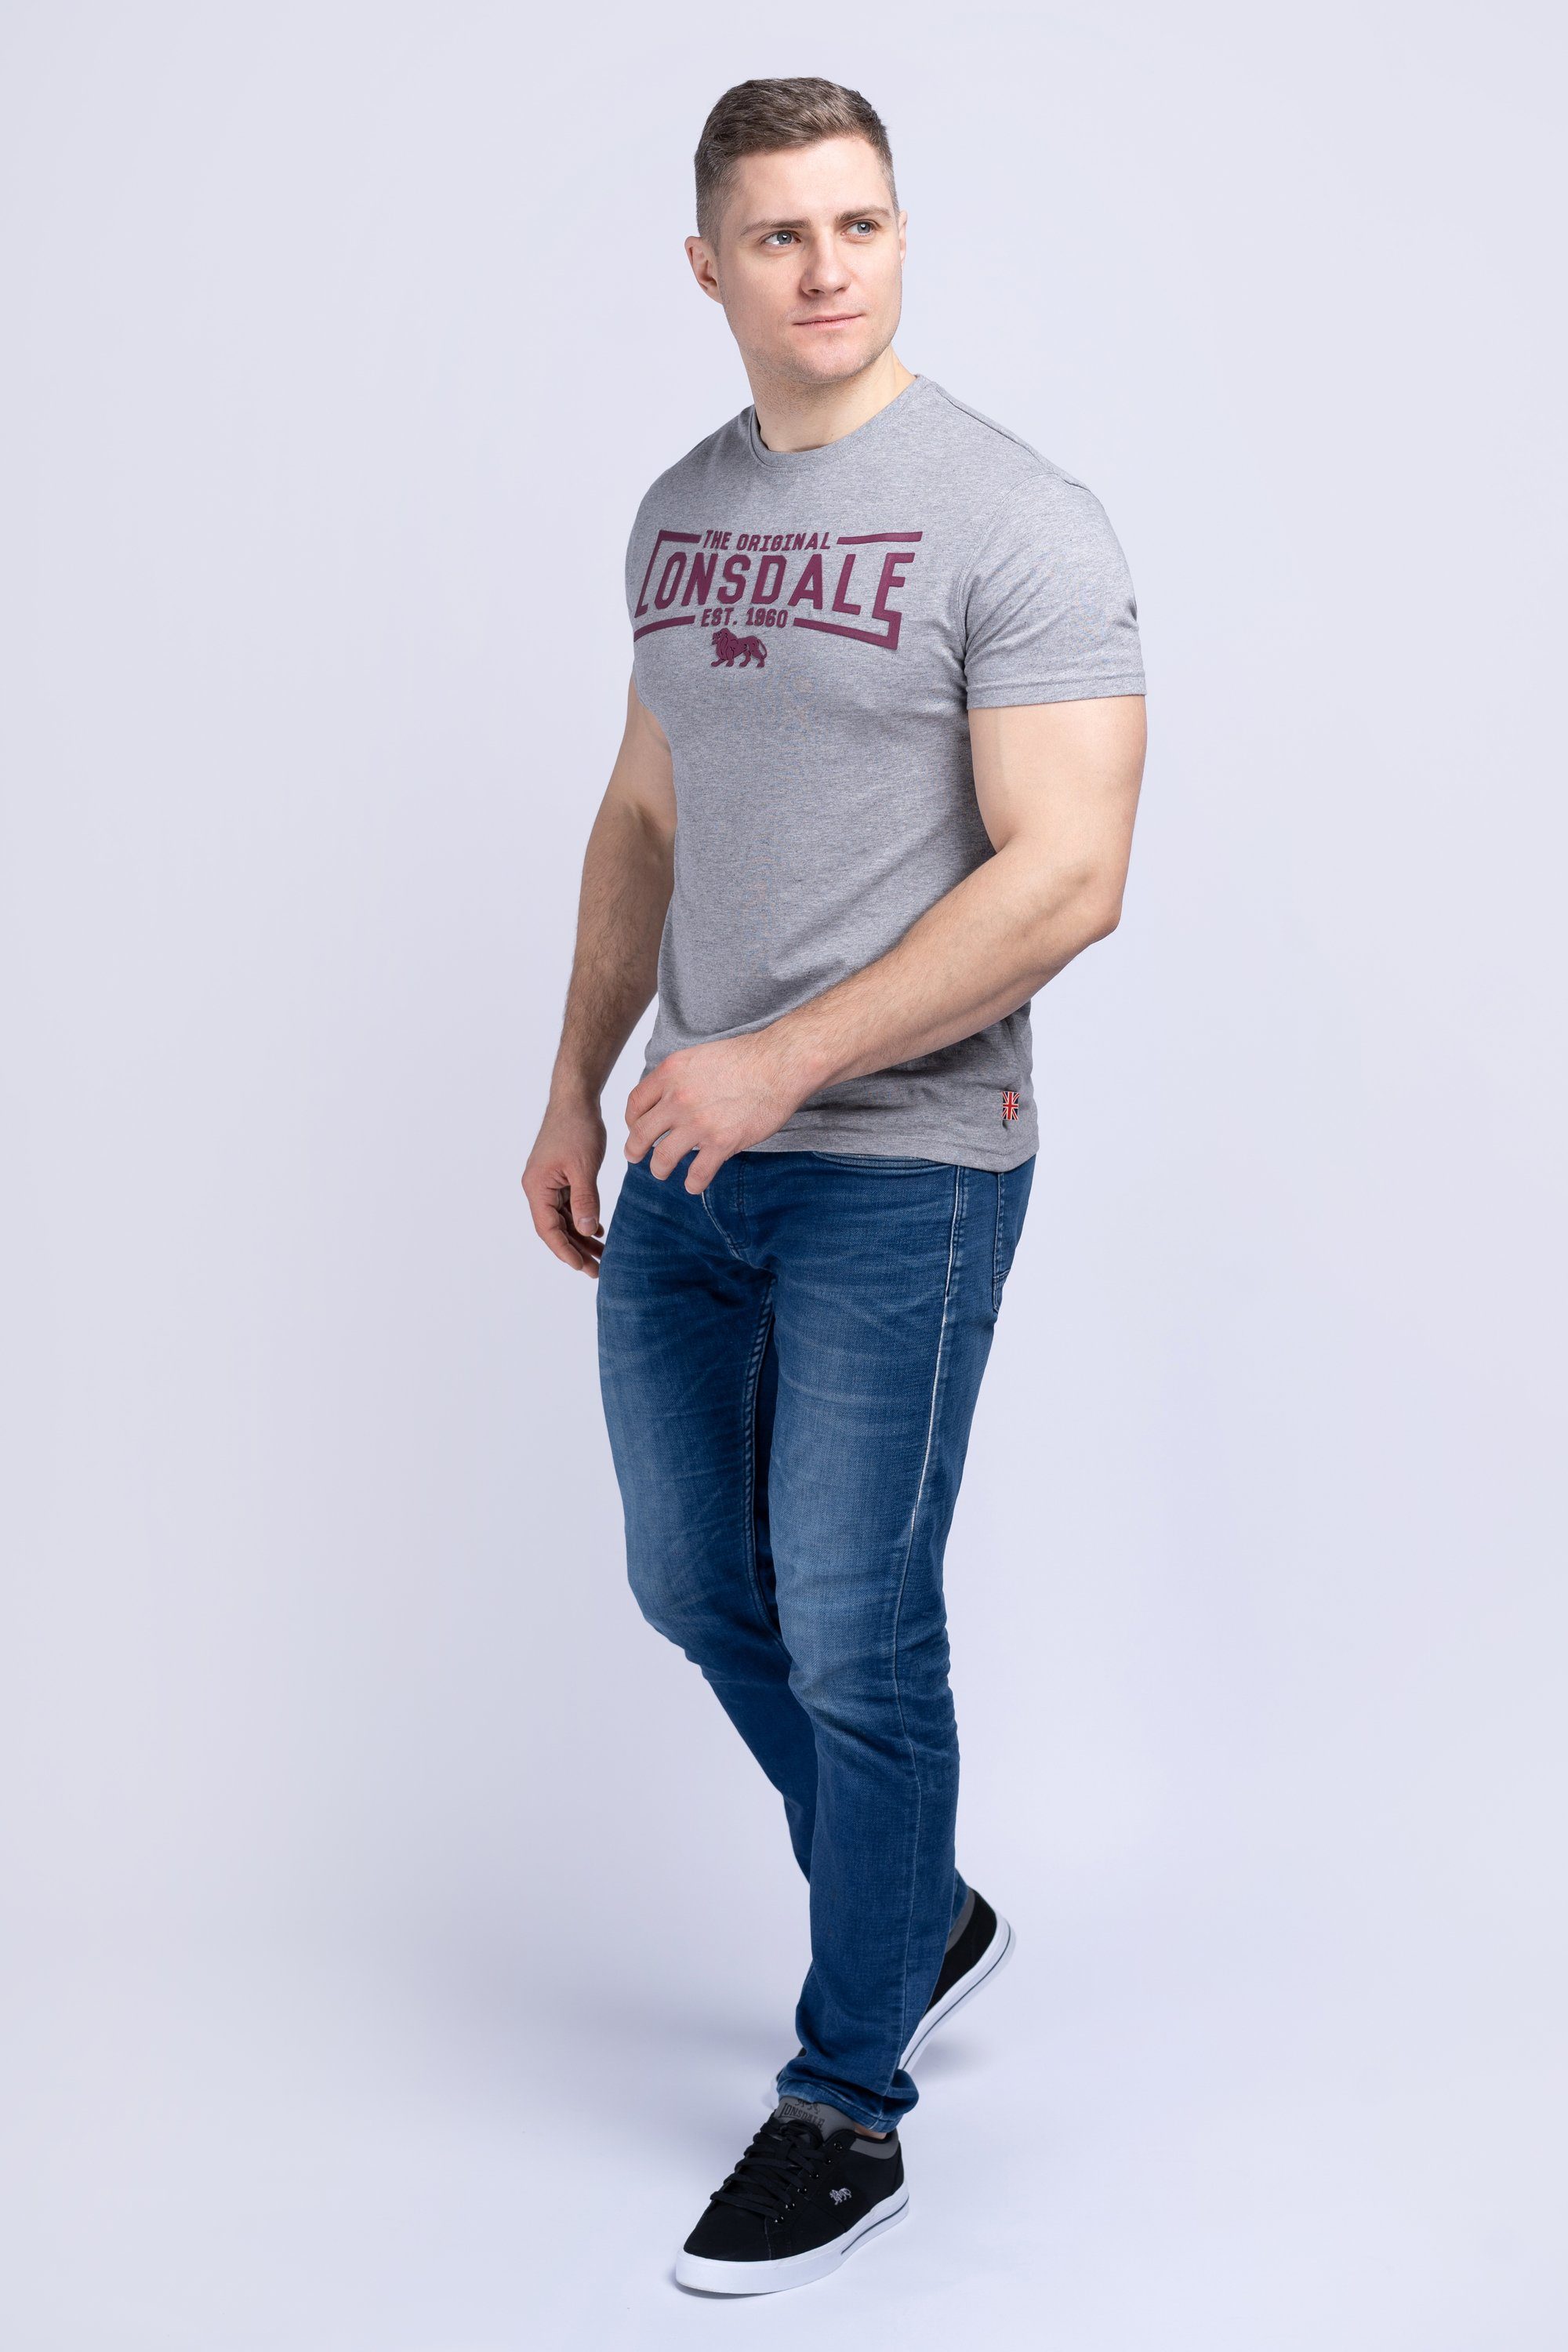 T-Shirt Grey/Oxblood Lonsdale NYBSTER Marl